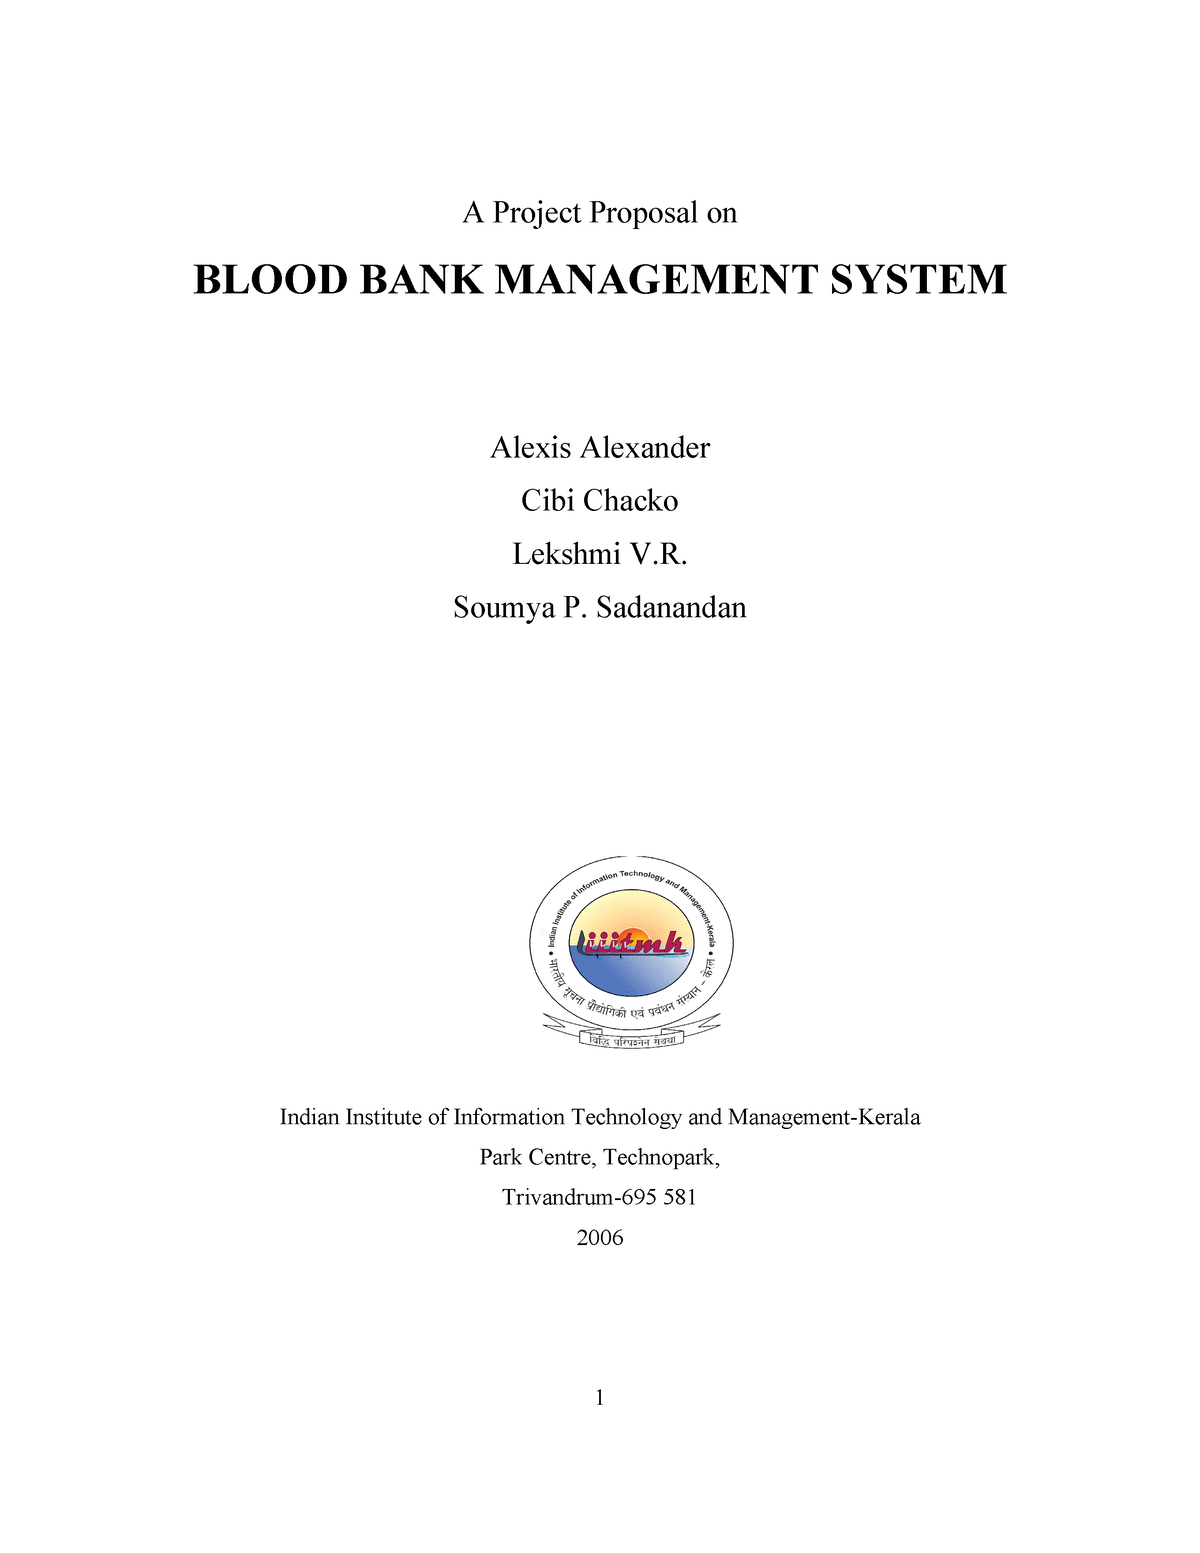 business plan for blood bank